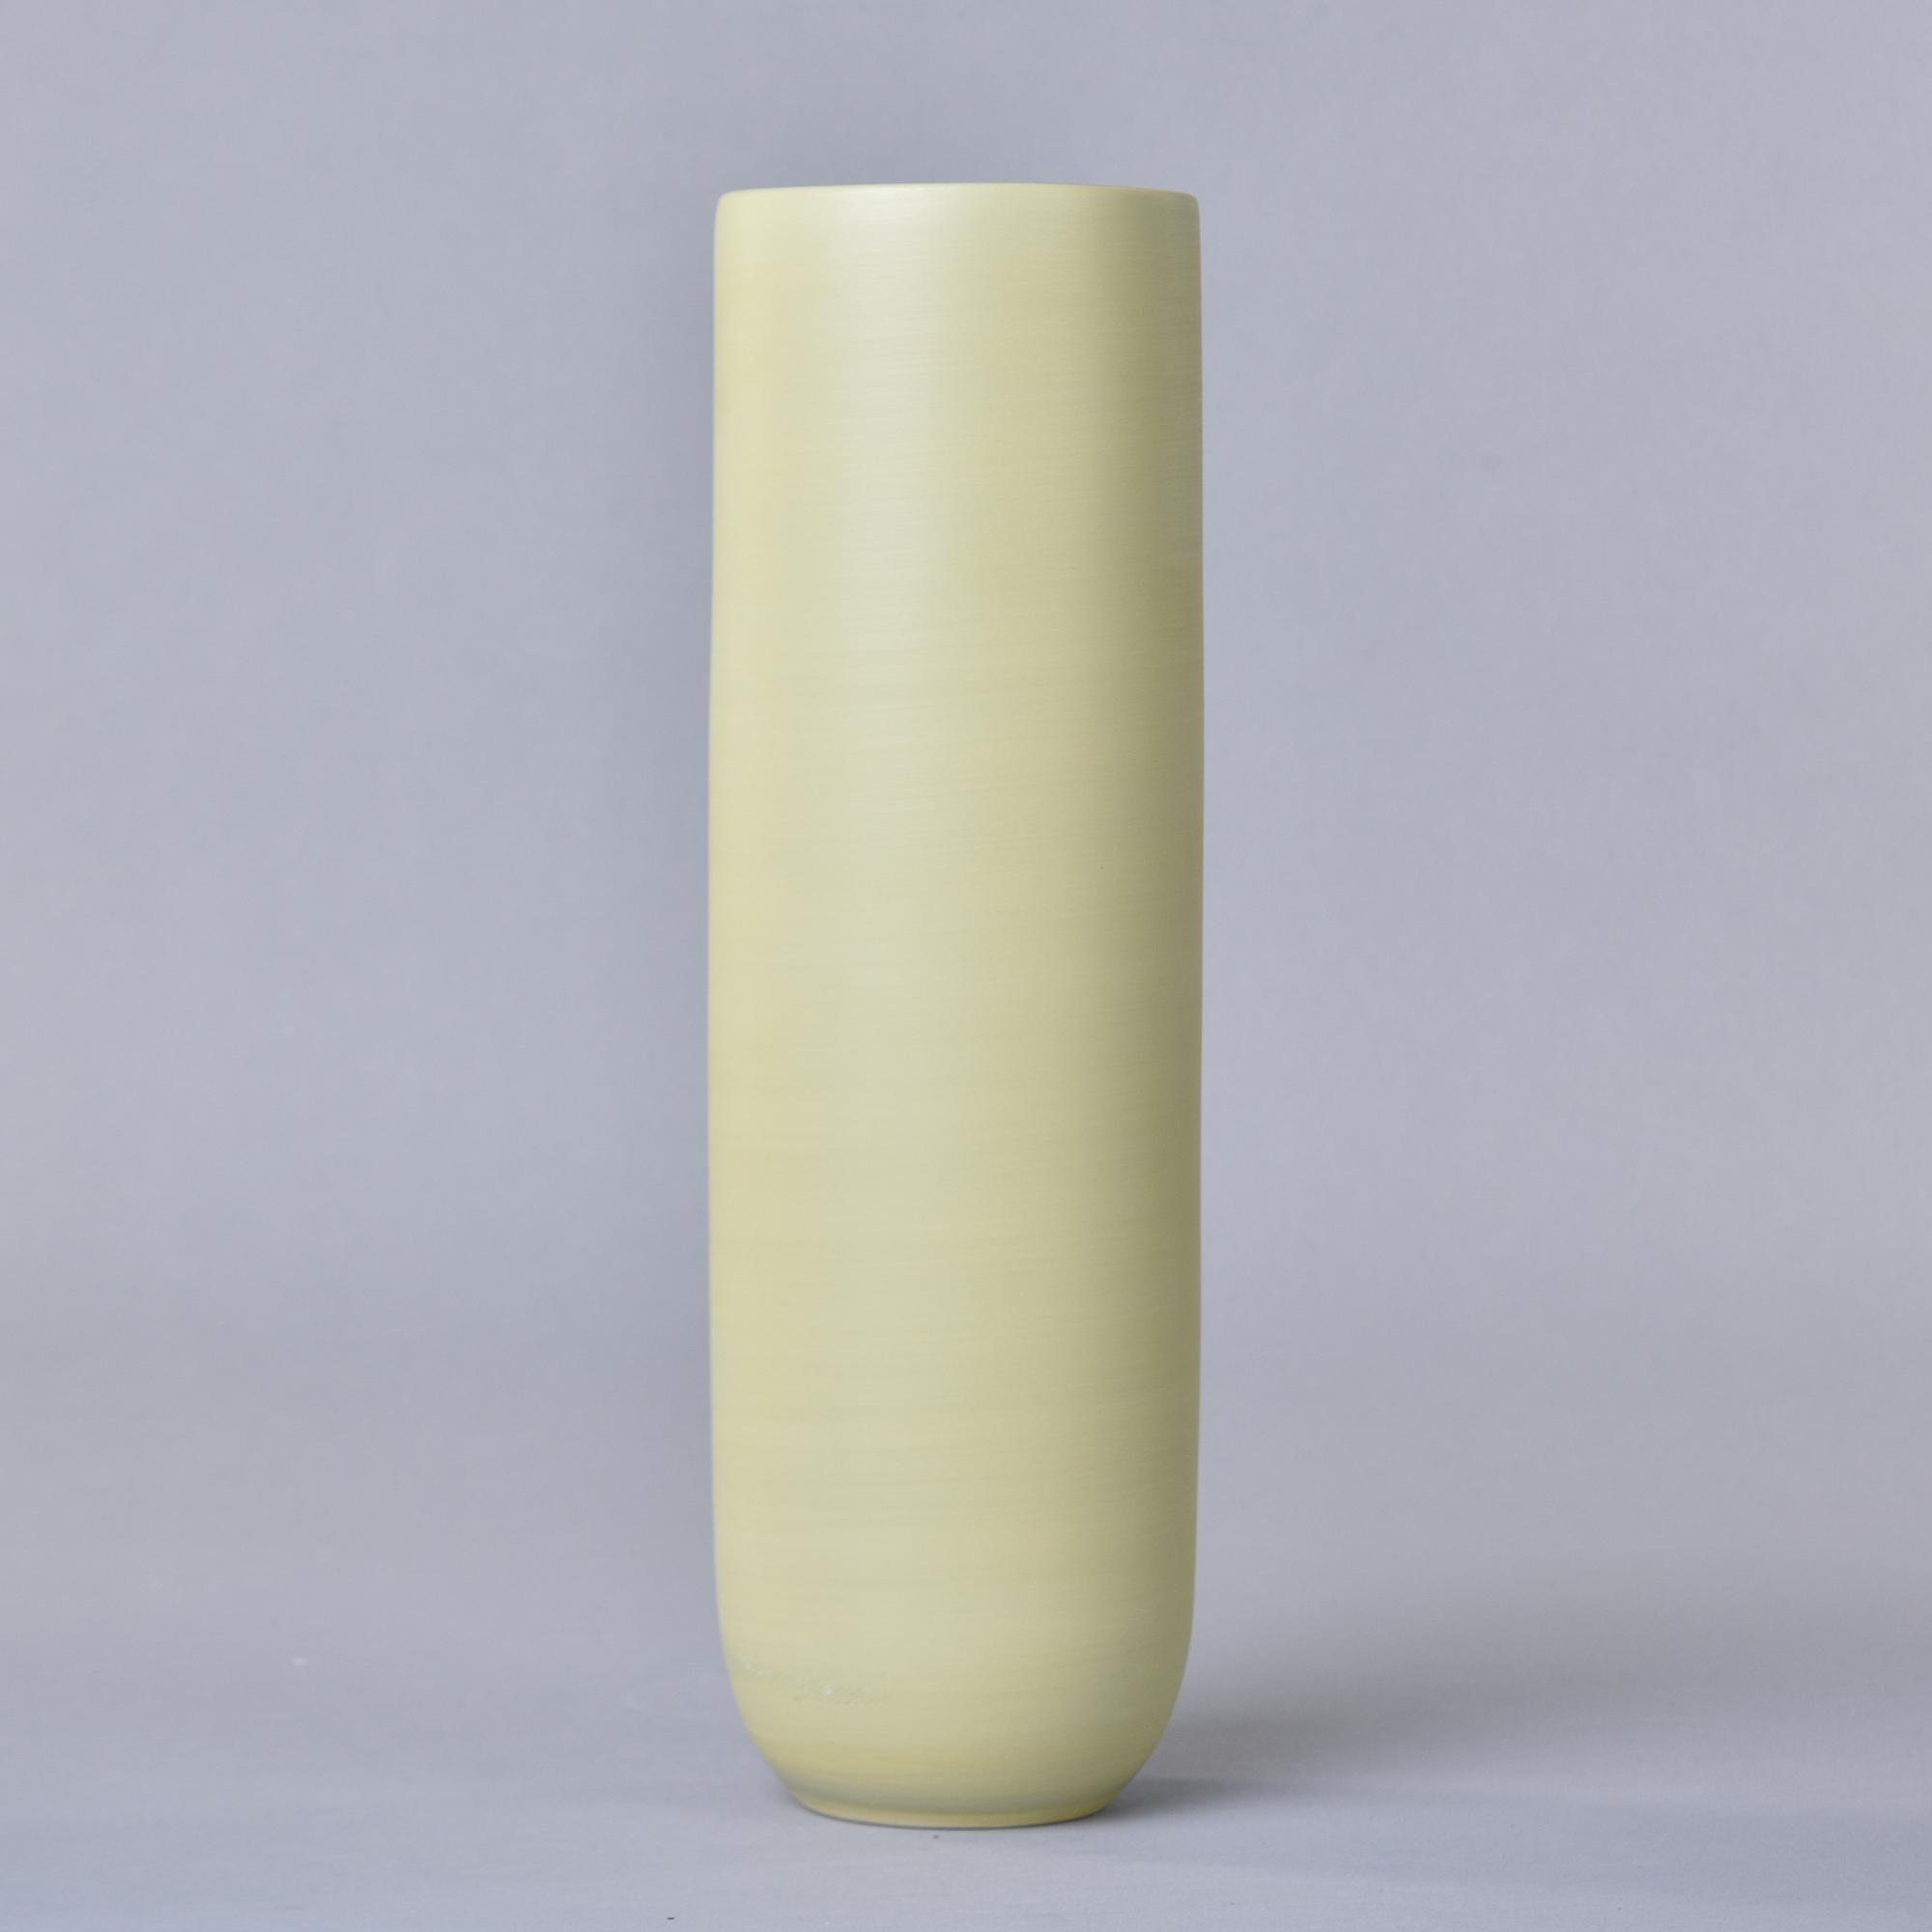 New and made in Italy by Rina Menardi, this ceramic vase is 14” tall. Exterior is glazed in pistachio - a matte finish pale green with a matte black interior. Signed by maker on underside of base. At the time of this posting, we have several other